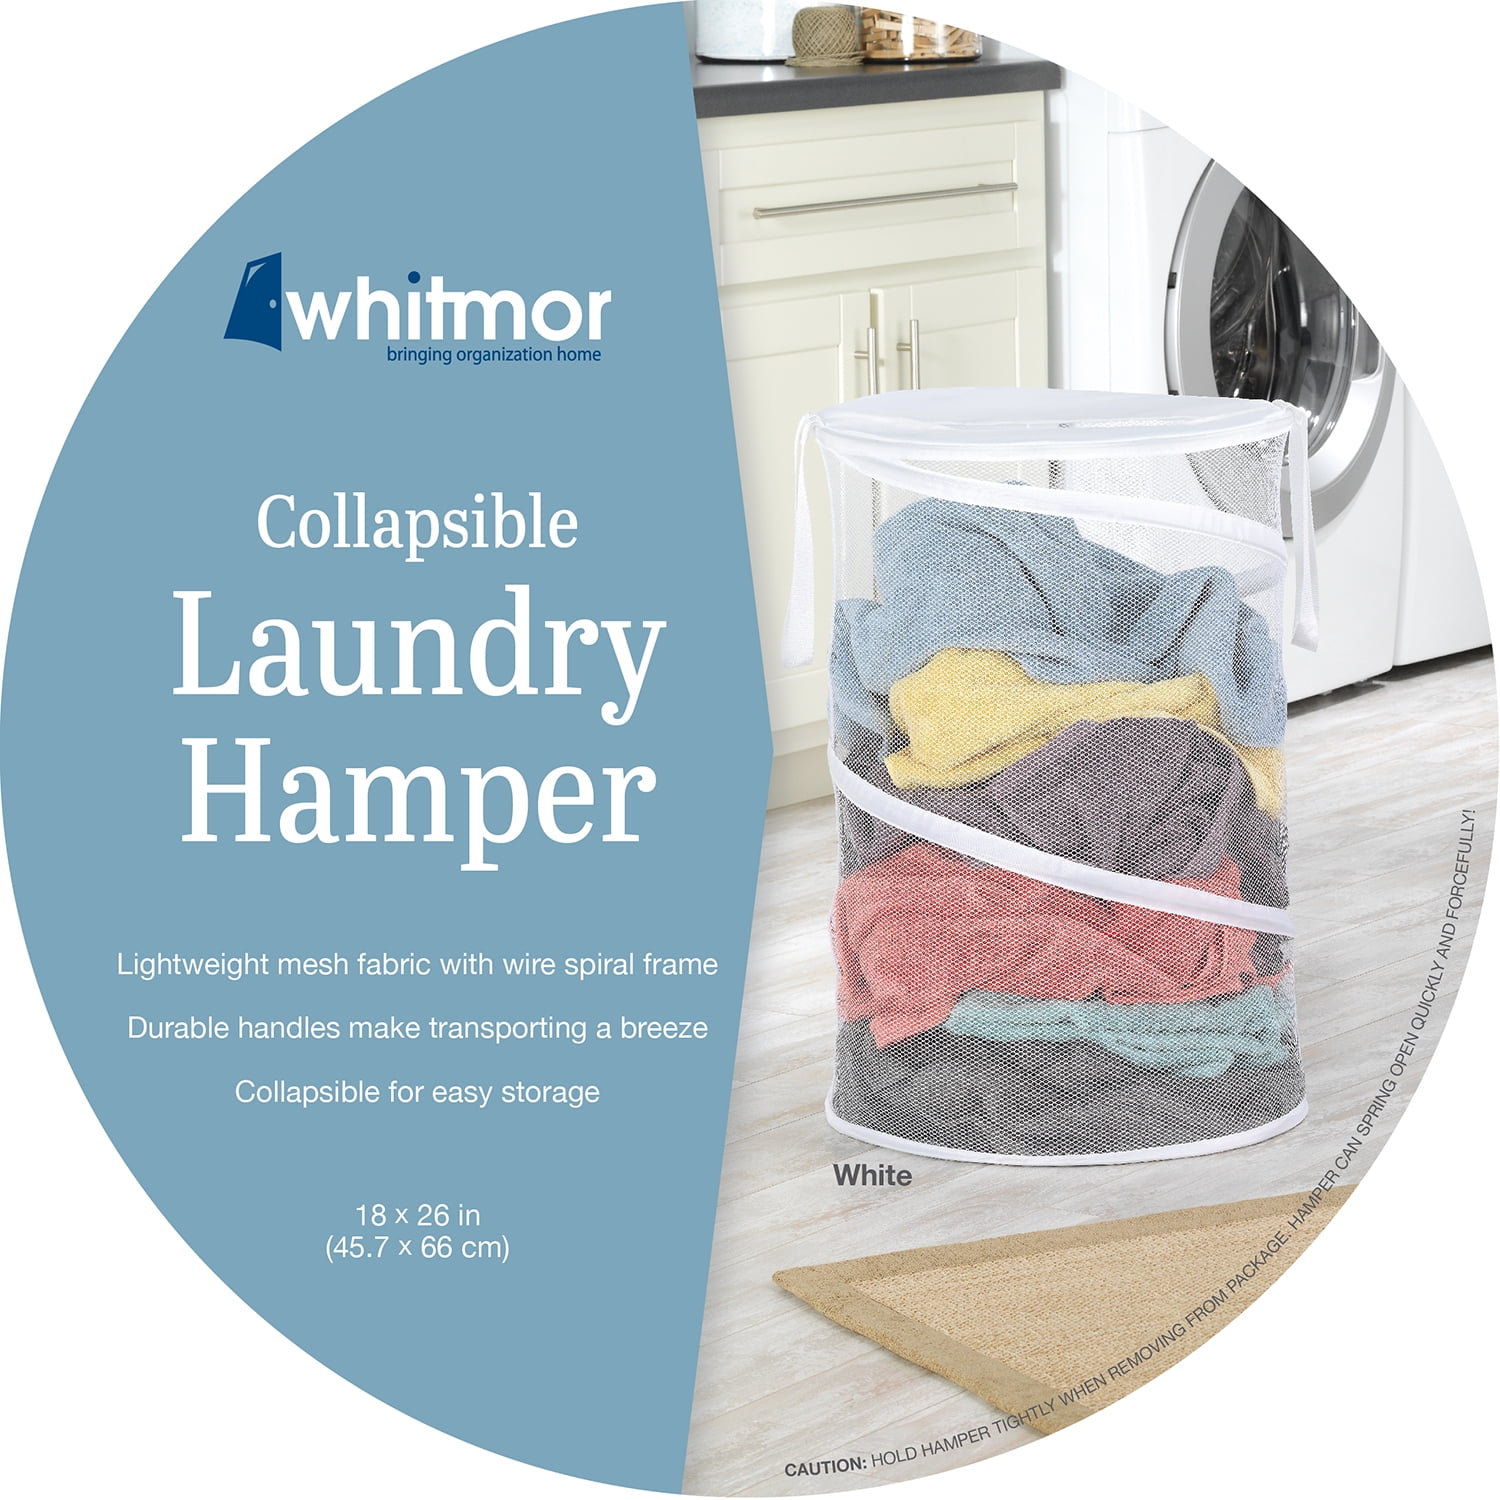 Whitmor White Collapsible Laundry Hamper 6233-1170-W-PDQ - The Home Depot